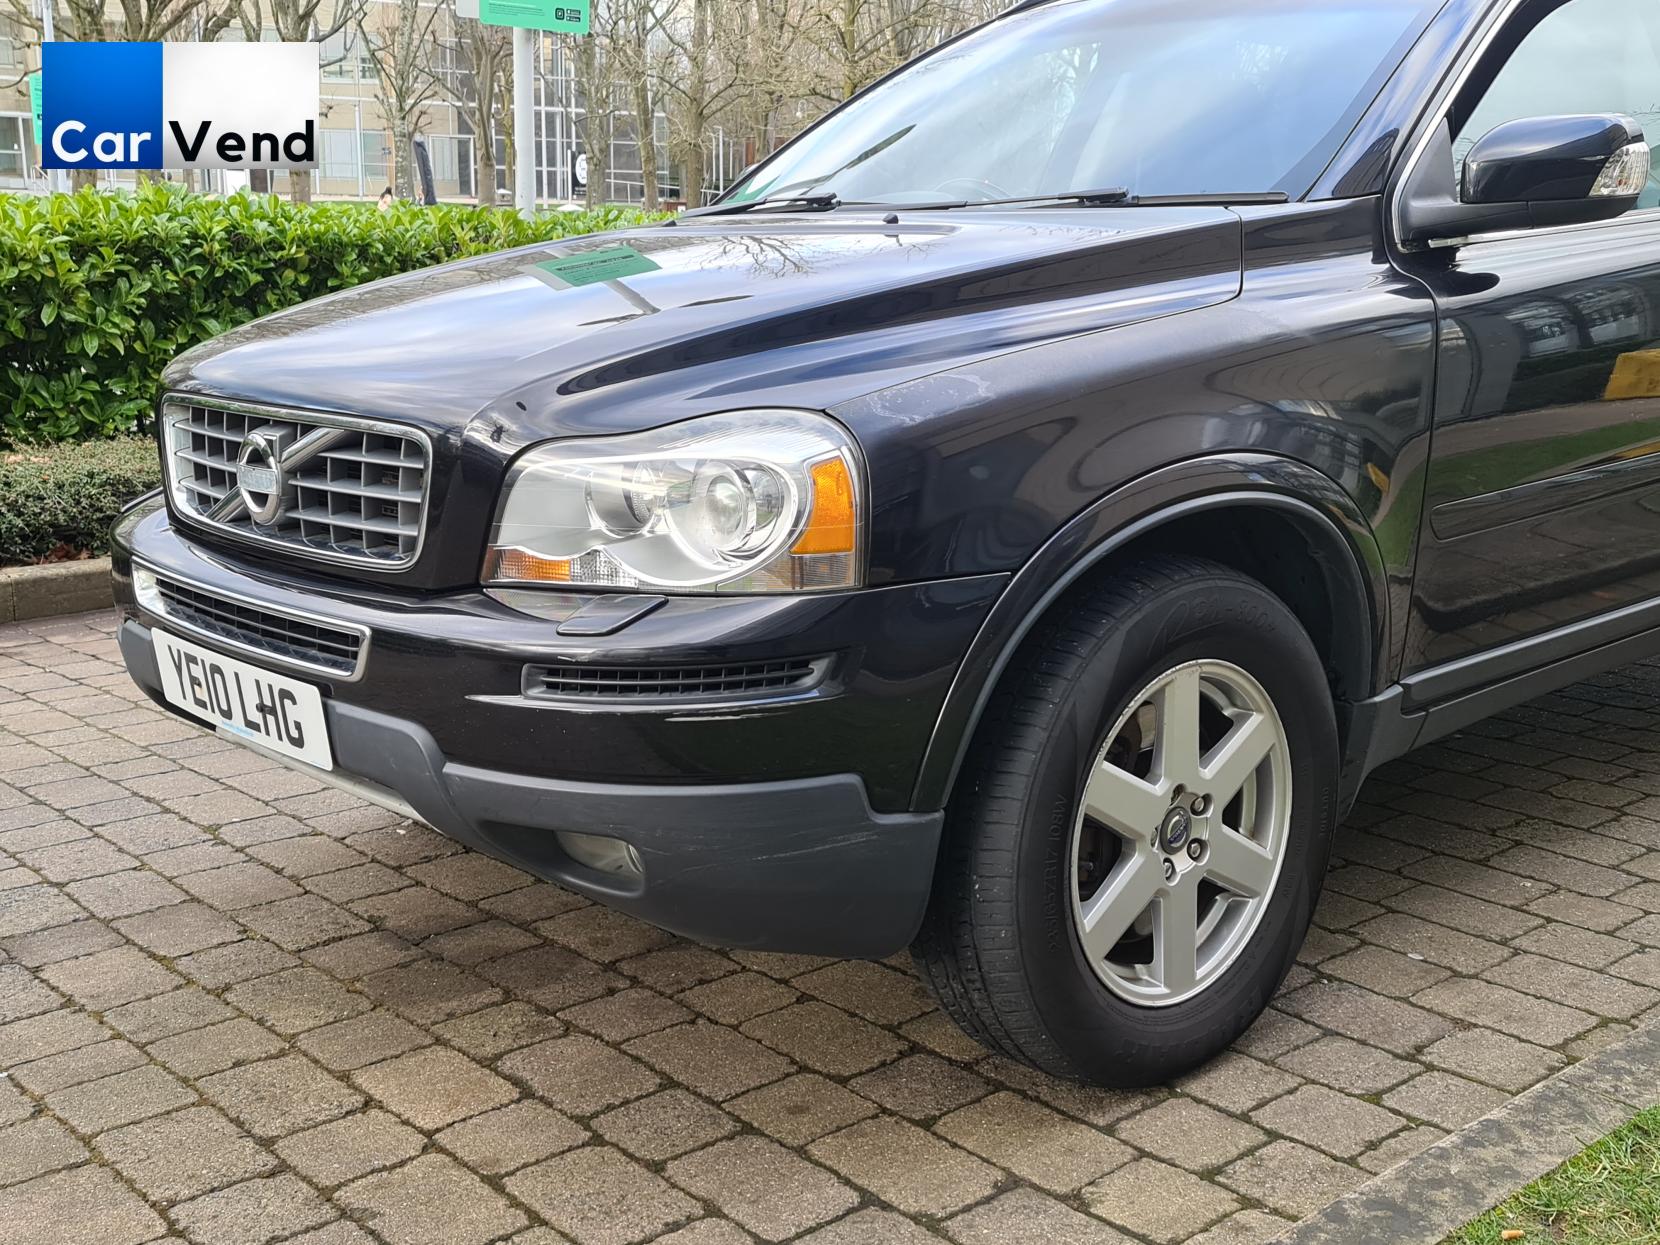 Volvo XC90 2.4 D5 Active SUV 5dr Diesel Geartronic AWD (224 g/km, 182 bhp)